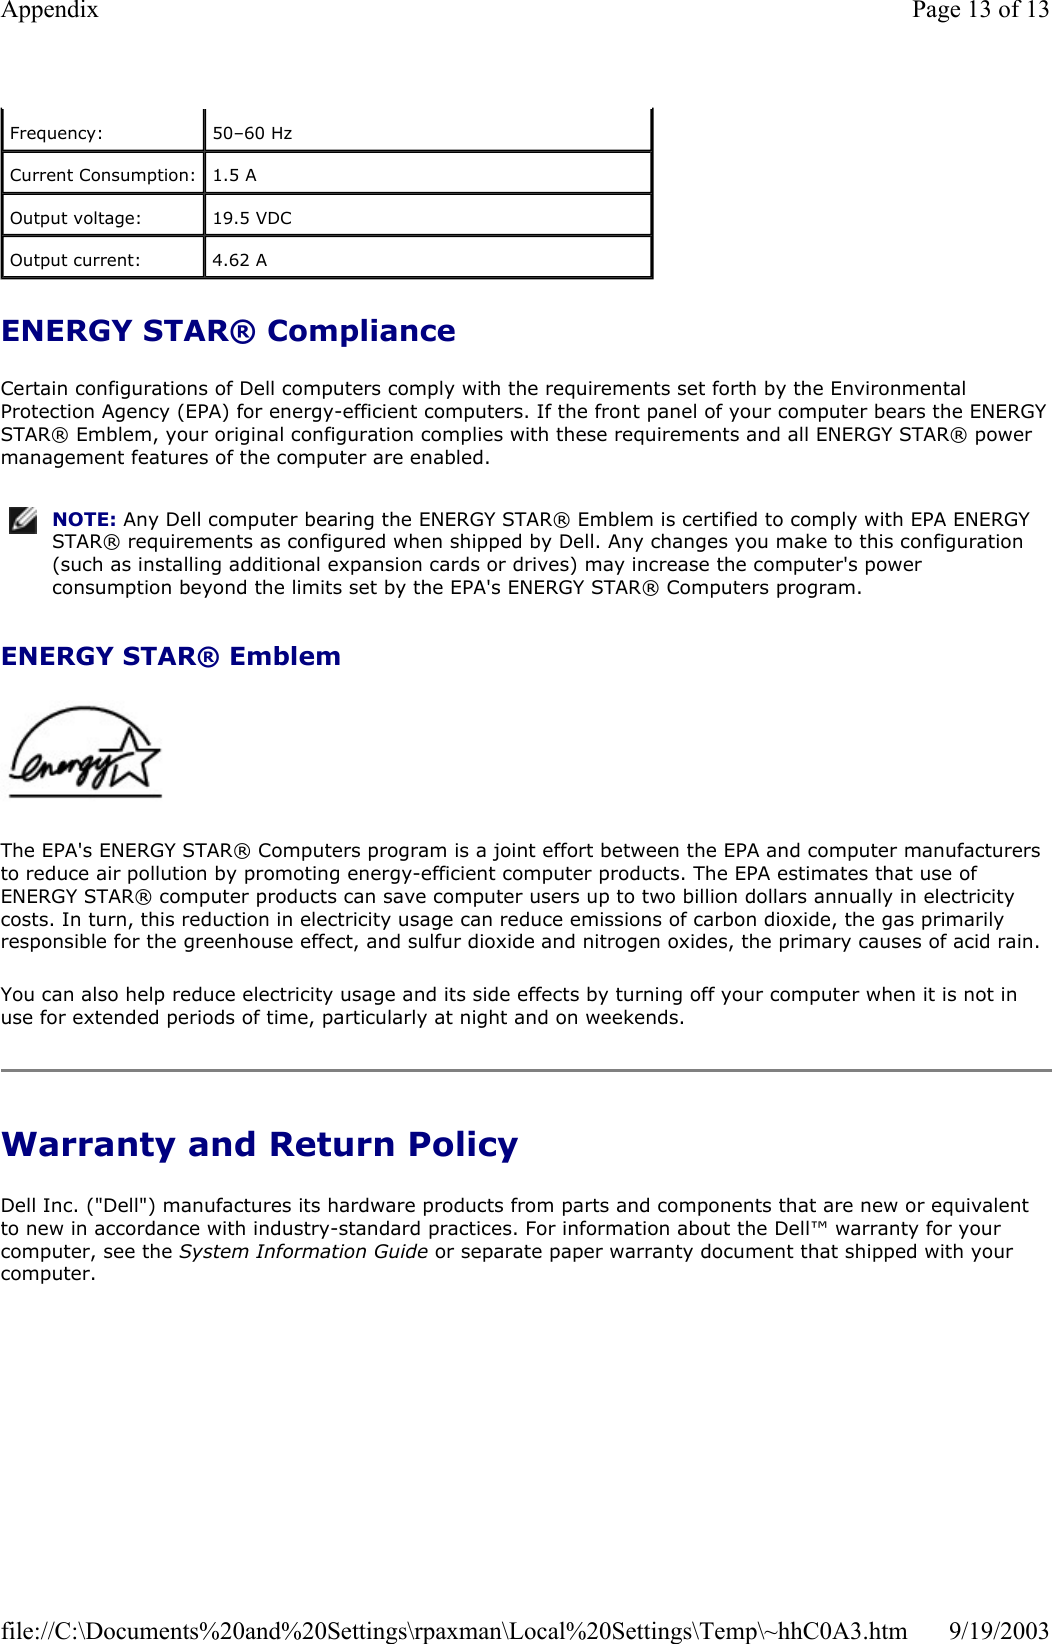 ENERGY STAR® Compliance Certain configurations of Dell computers comply with the requirements set forth by the Environmental Protection Agency (EPA) for energy-efficient computers. If the front panel of your computer bears the ENERGY STAR® Emblem, your original configuration complies with these requirements and all ENERGY STAR® power management features of the computer are enabled. ENERGY STAR® Emblem    The EPA&apos;s ENERGY STAR® Computers program is a joint effort between the EPA and computer manufacturers to reduce air pollution by promoting energy-efficient computer products. The EPA estimates that use of ENERGY STAR® computer products can save computer users up to two billion dollars annually in electricity costs. In turn, this reduction in electricity usage can reduce emissions of carbon dioxide, the gas primarily responsible for the greenhouse effect, and sulfur dioxide and nitrogen oxides, the primary causes of acid rain. You can also help reduce electricity usage and its side effects by turning off your computer when it is not in use for extended periods of time, particularly at night and on weekends. Warranty and Return Policy Dell Inc. (&quot;Dell&quot;) manufactures its hardware products from parts and components that are new or equivalent to new in accordance with industry-standard practices. For information about the Dell™ warranty for your computer, see the System Information Guide or separate paper warranty document that shipped with your computer. Frequency:  50–60 Hz Current Consumption:  1.5 A Output voltage:  19.5 VDC Output current:  4.62 A NOTE: Any Dell computer bearing the ENERGY STAR® Emblem is certified to comply with EPA ENERGY STAR® requirements as configured when shipped by Dell. Any changes you make to this configuration (such as installing additional expansion cards or drives) may increase the computer&apos;s power consumption beyond the limits set by the EPA&apos;s ENERGY STAR® Computers program.Page 13 of 13Appendix9/19/2003file://C:\Documents%20and%20Settings\rpaxman\Local%20Settings\Temp\~hhC0A3.htm